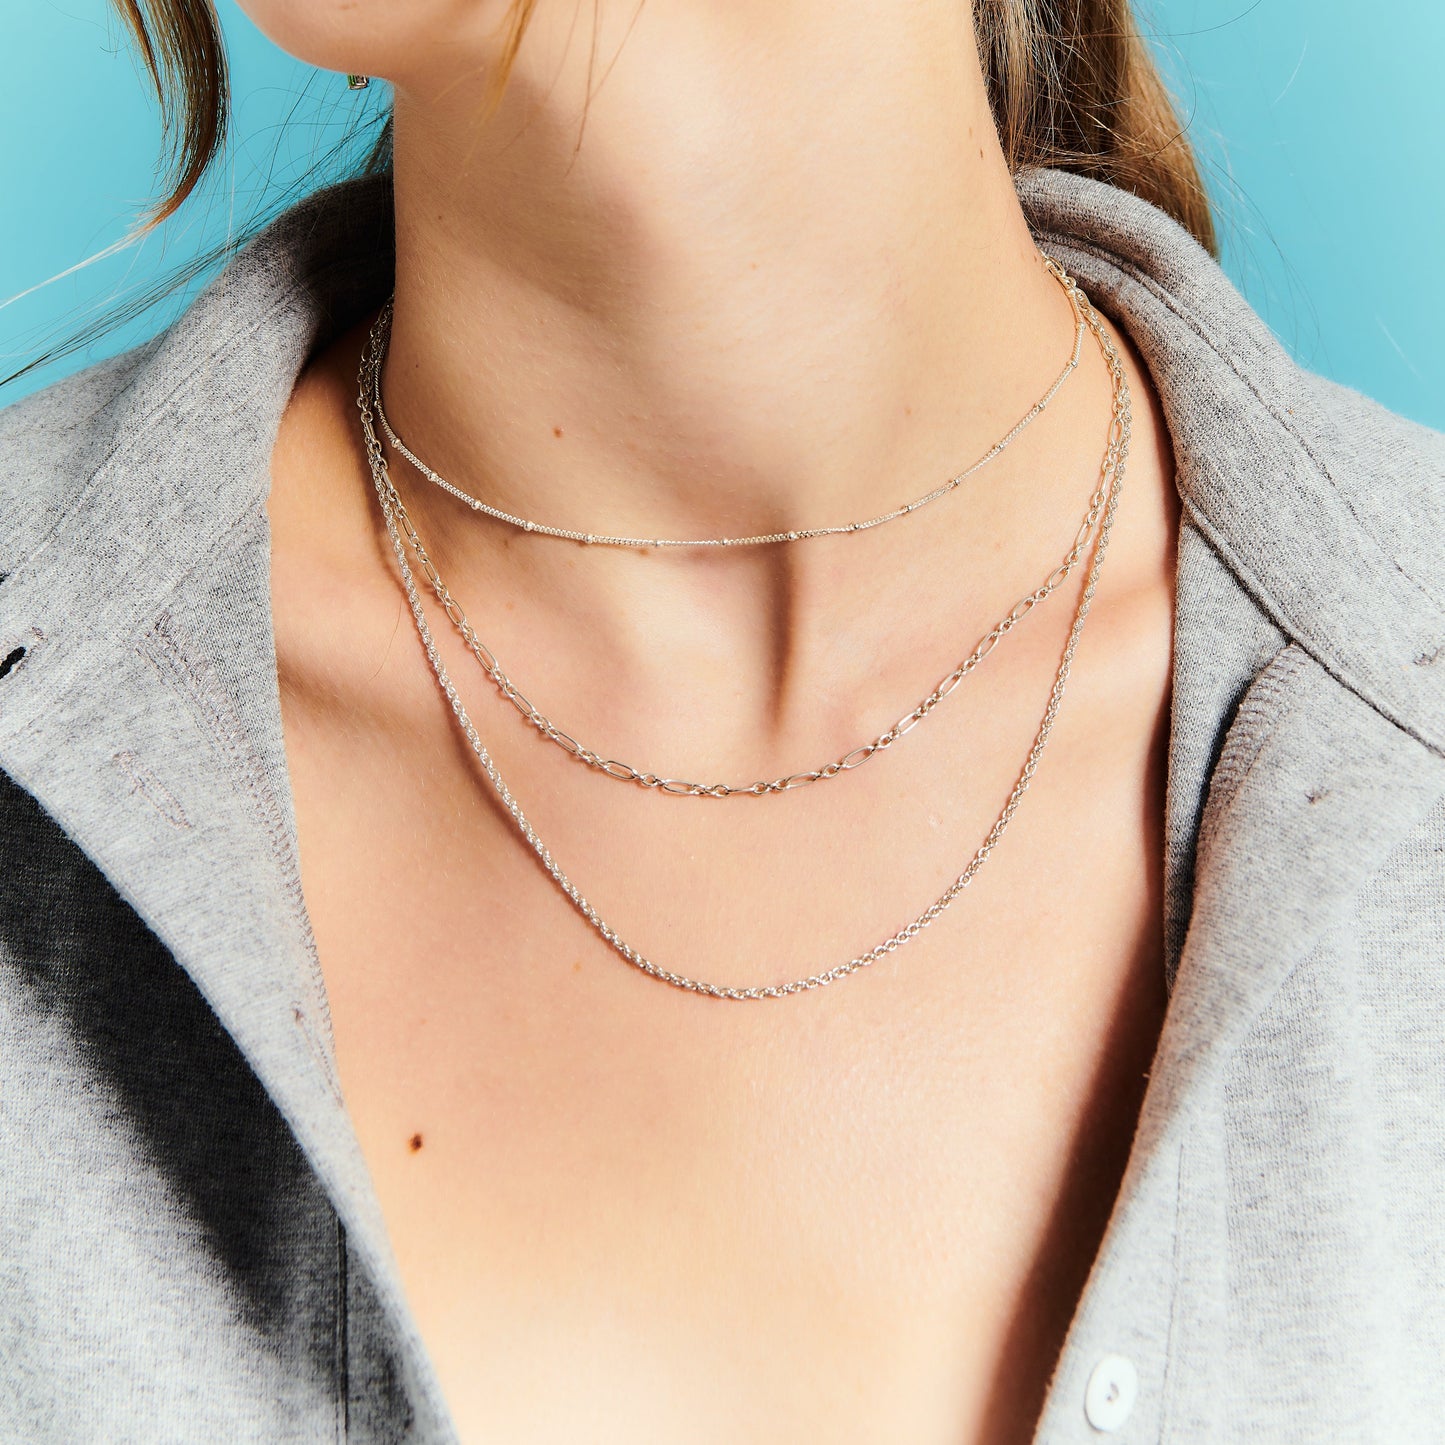 Slim rope Chain Necklace